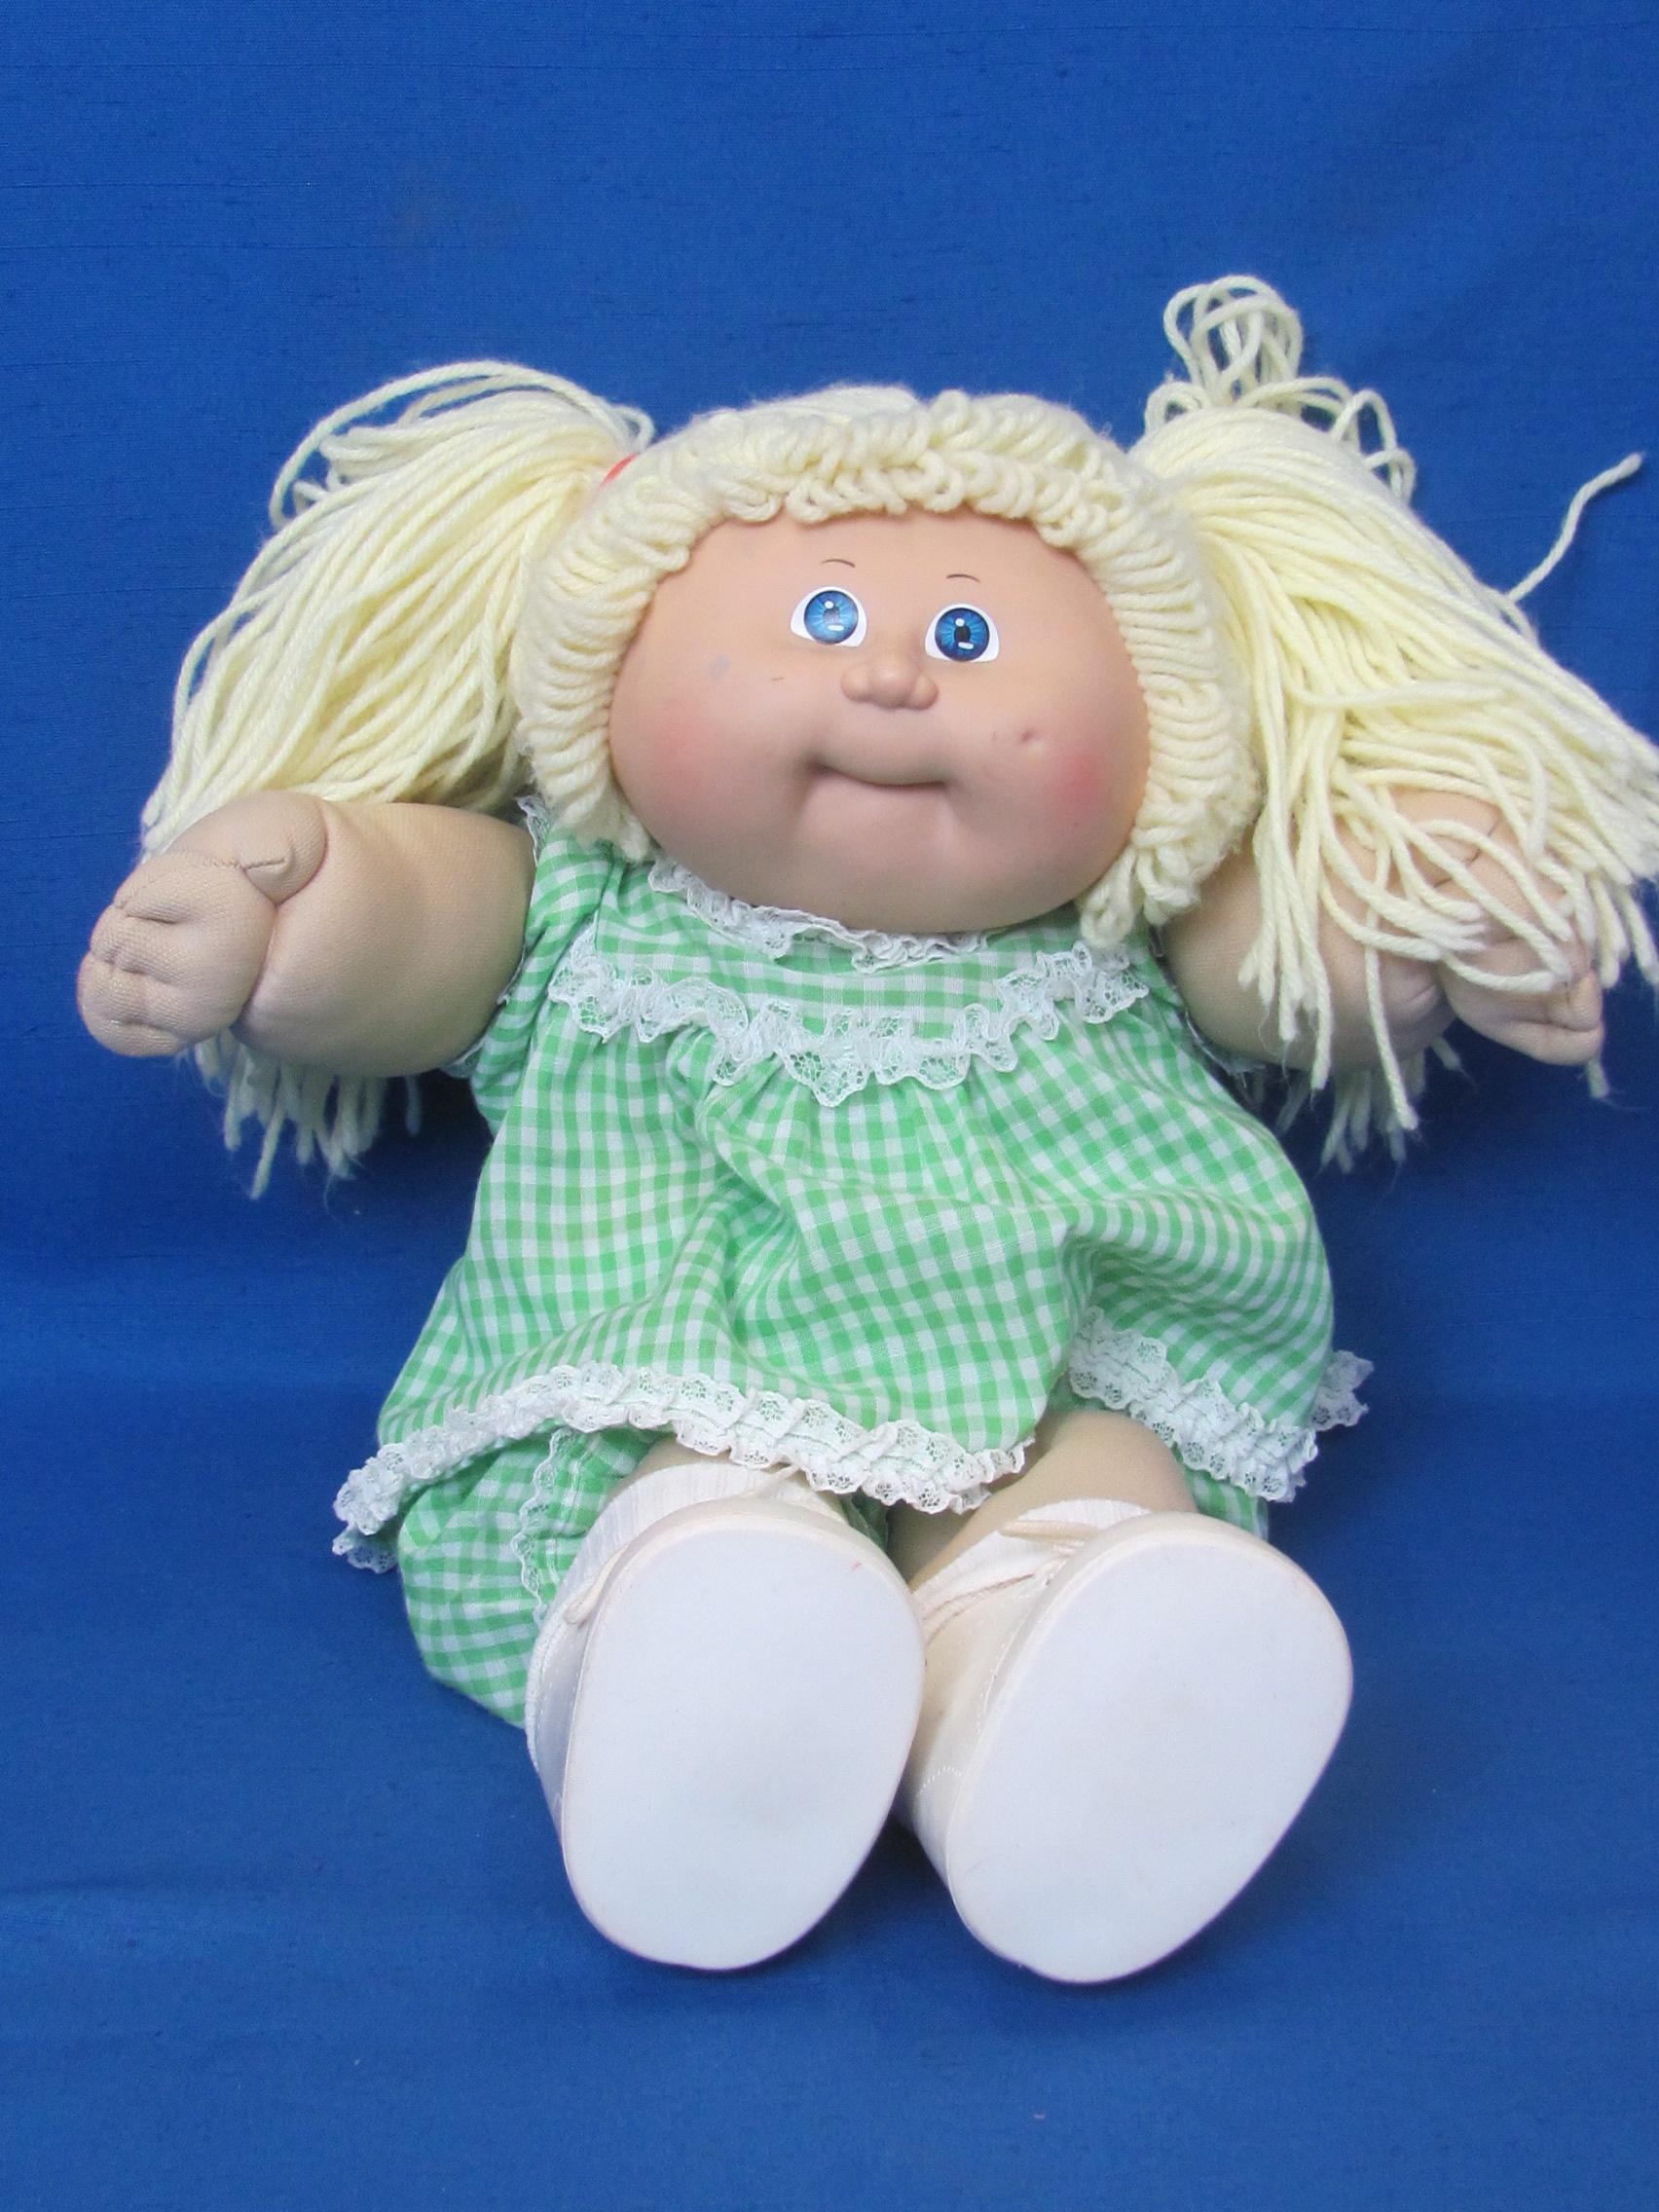 1980s Cabbage Patch Doll with Birth Certificate & Clothes – Doll Carrier – Doll is 15” tall